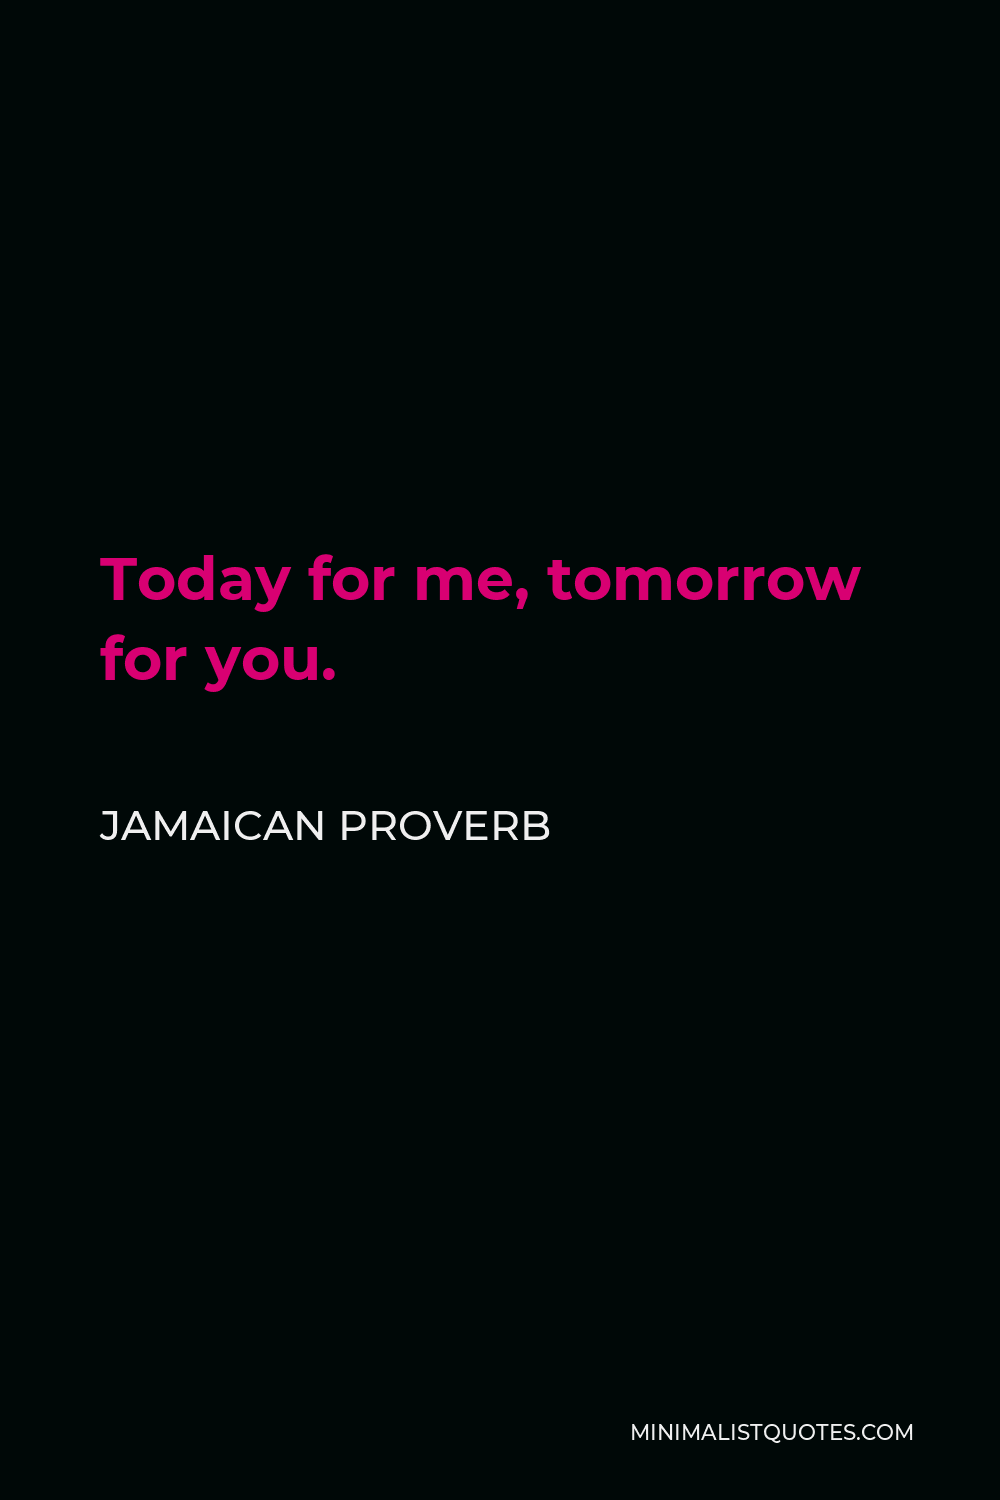 Jamaican Proverb Quote - Today for me, tomorrow for you.